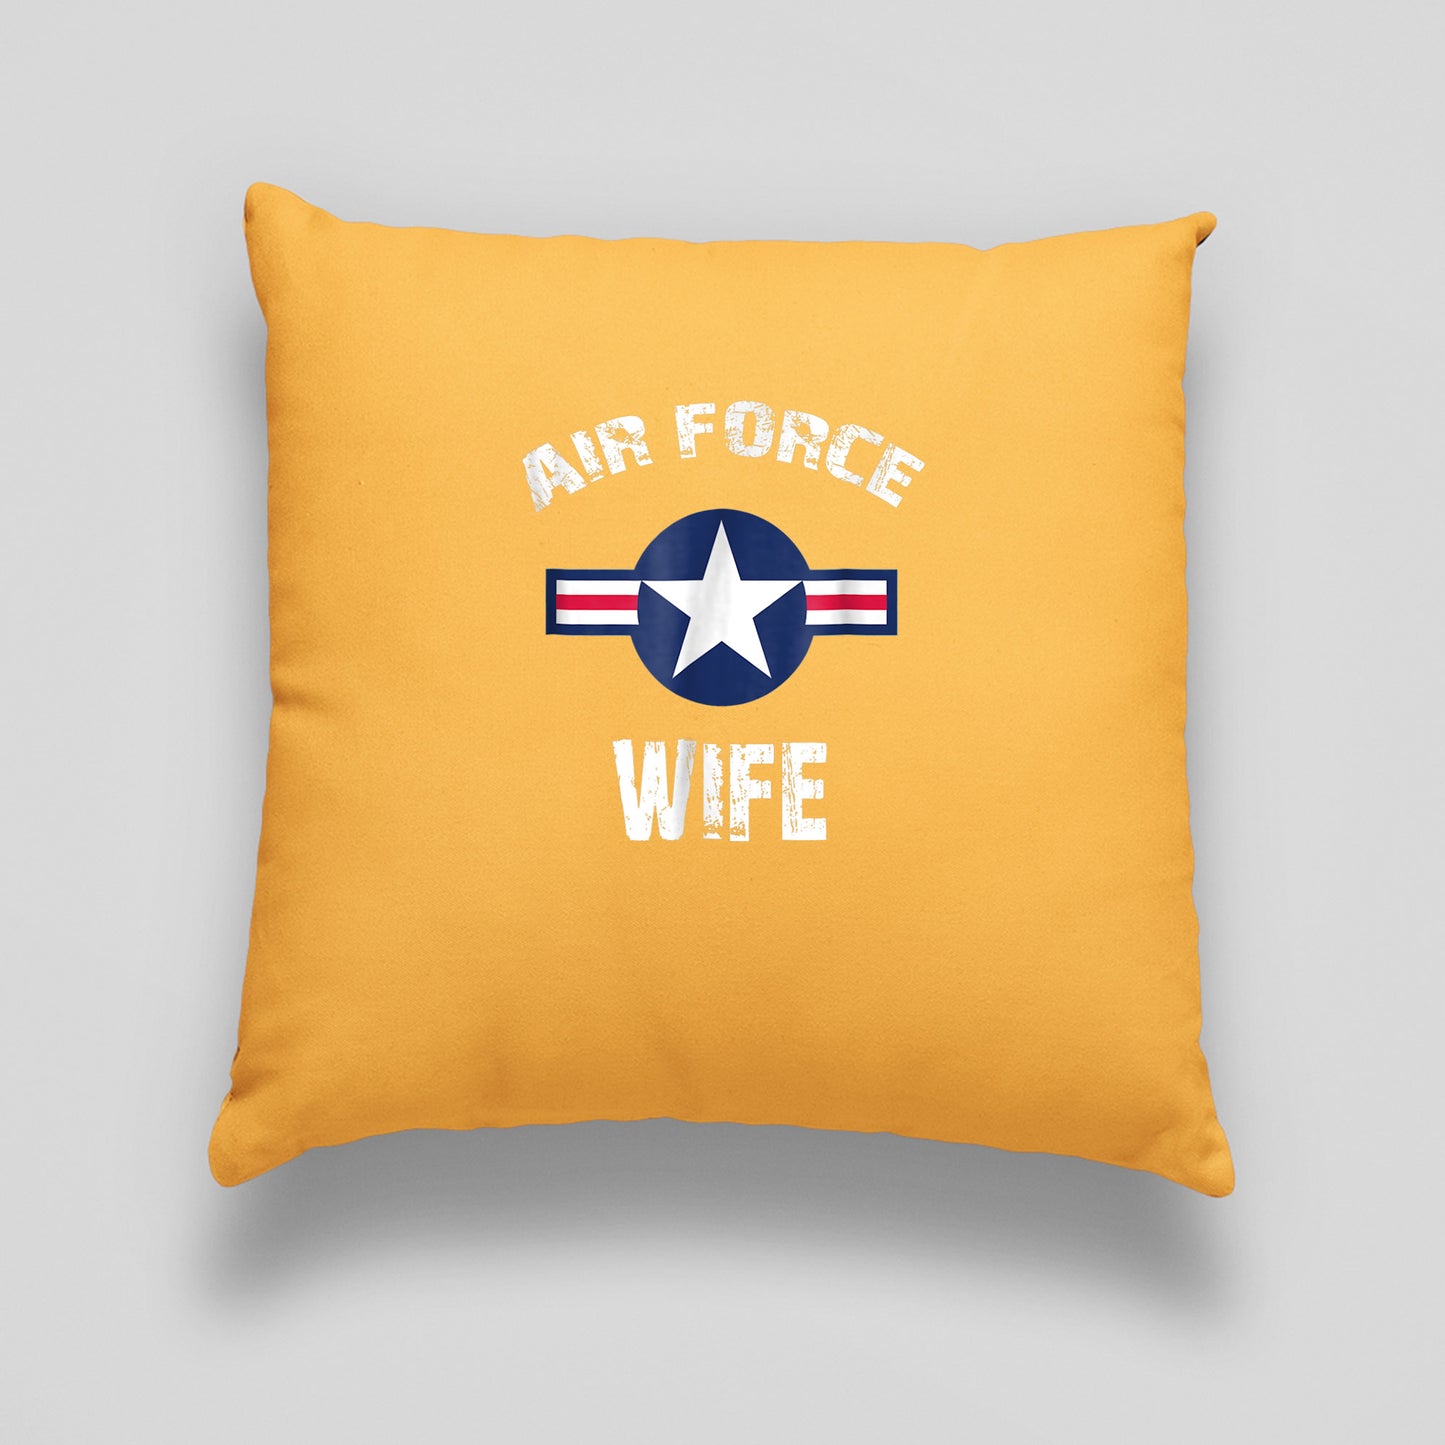 Memorial Day 2021, Air Force Memorial Pillow, Air Force Wife Print Linen Cushion, For Wife